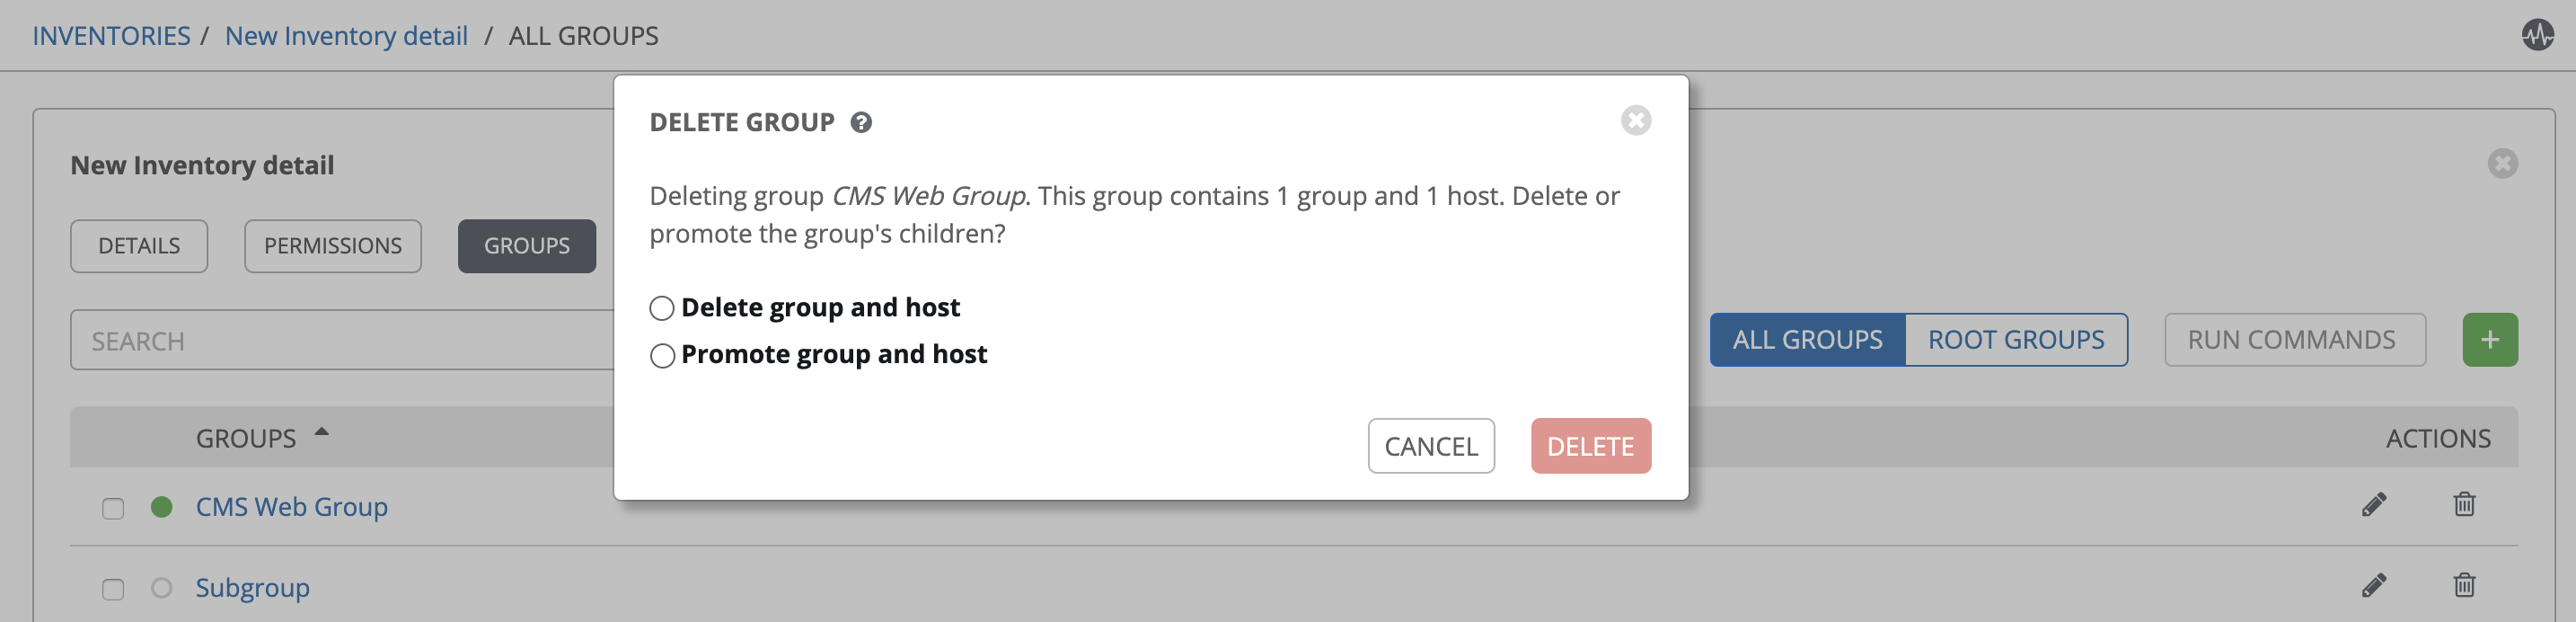 _images/inventories-groups-delete-root-with-children.png